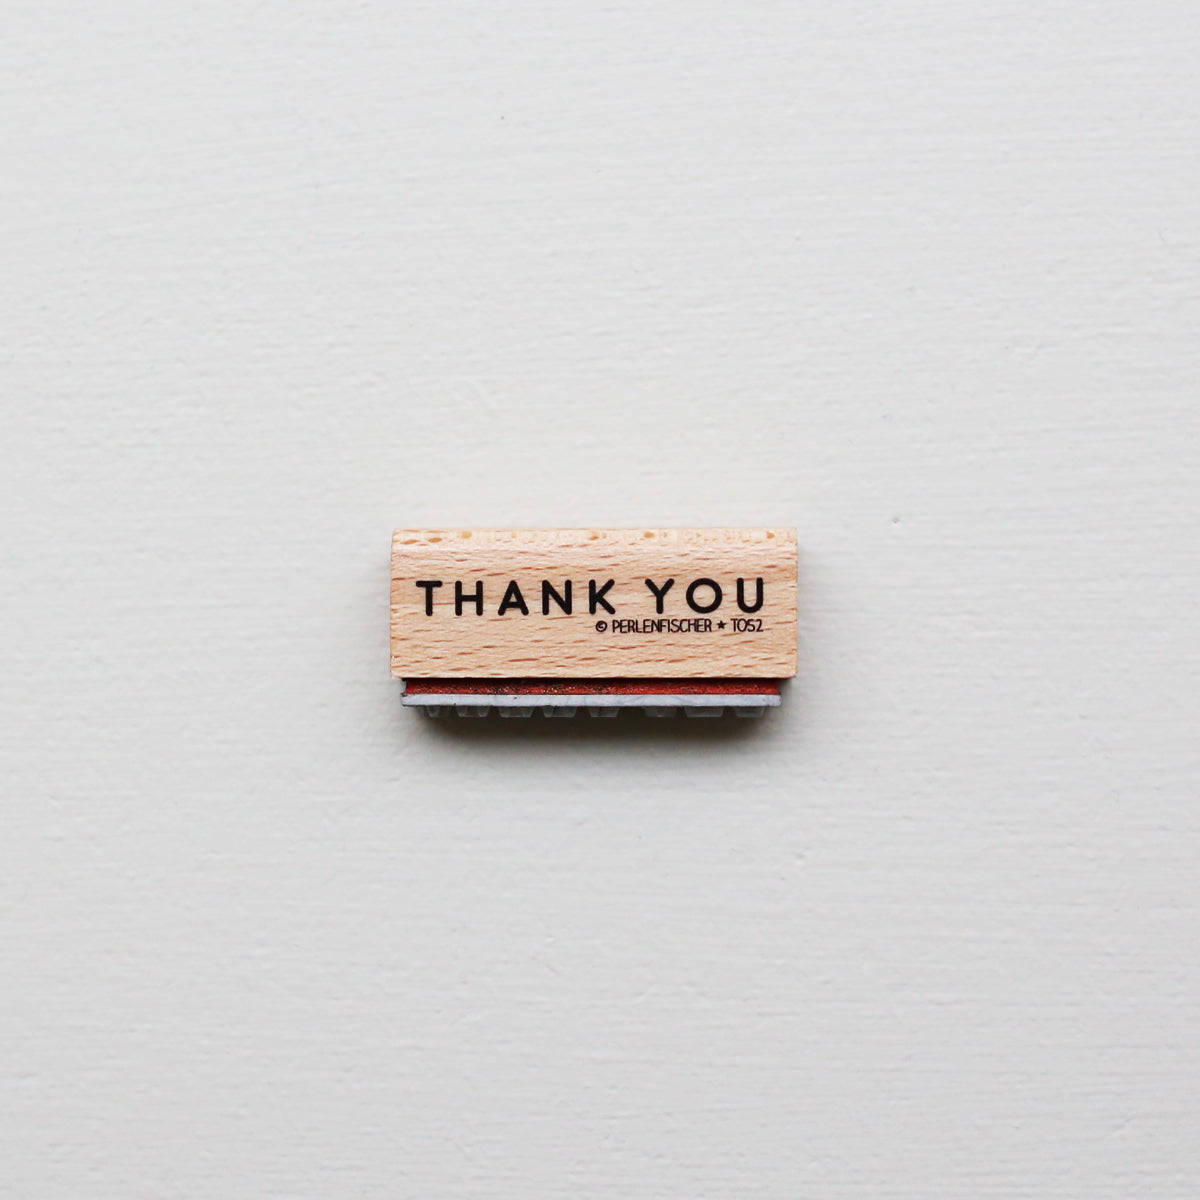 RUBBER STAMP // THANK YOU